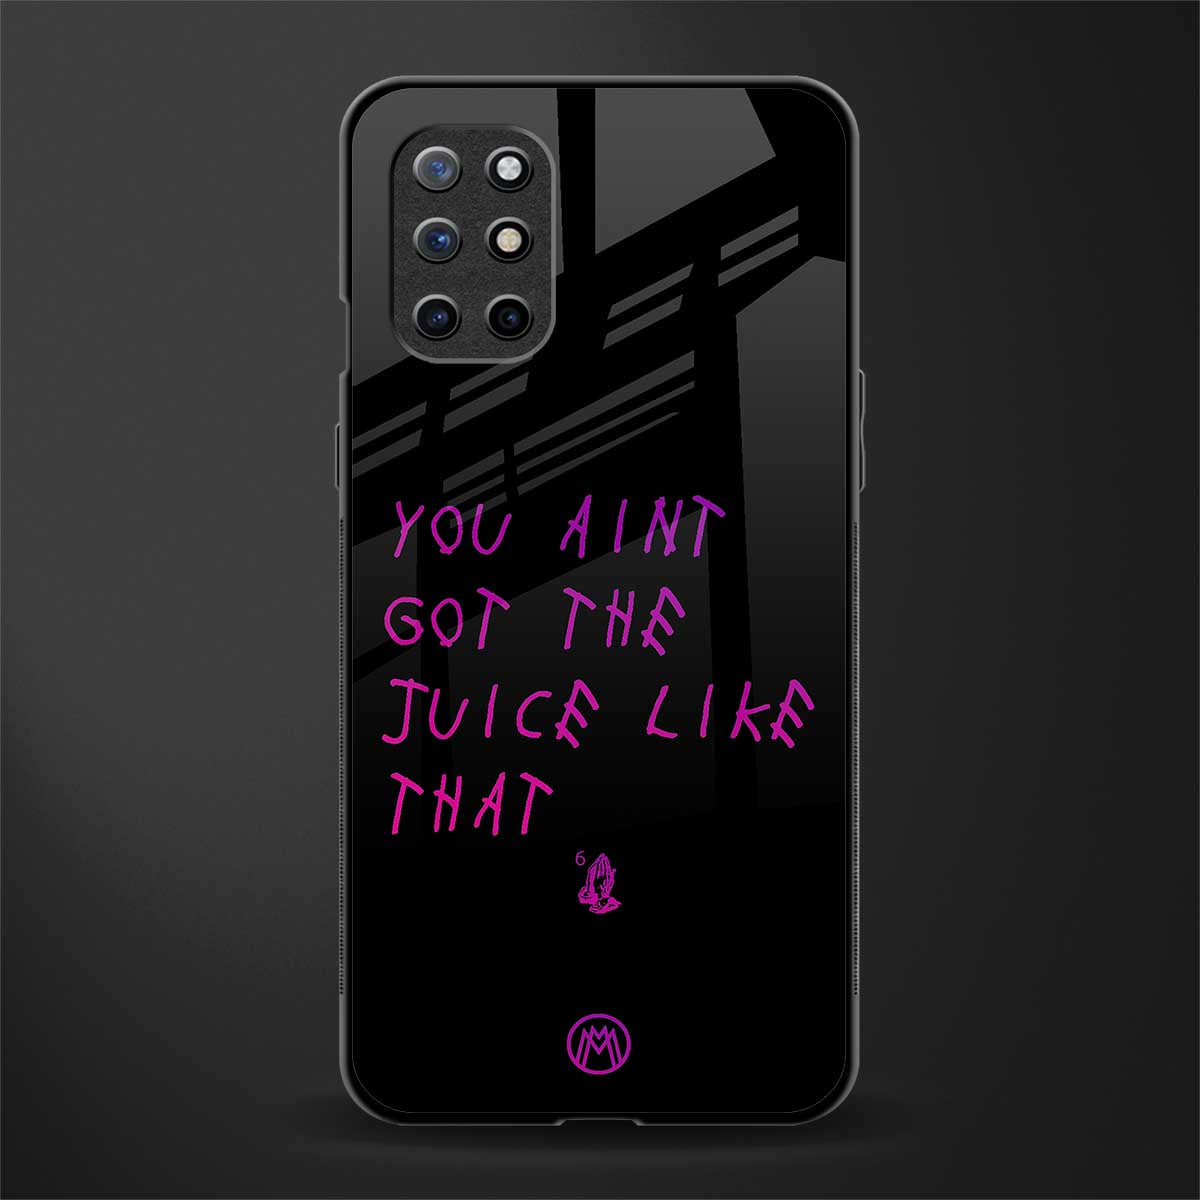 ain't got the juice black edition glass case for oneplus 8t image